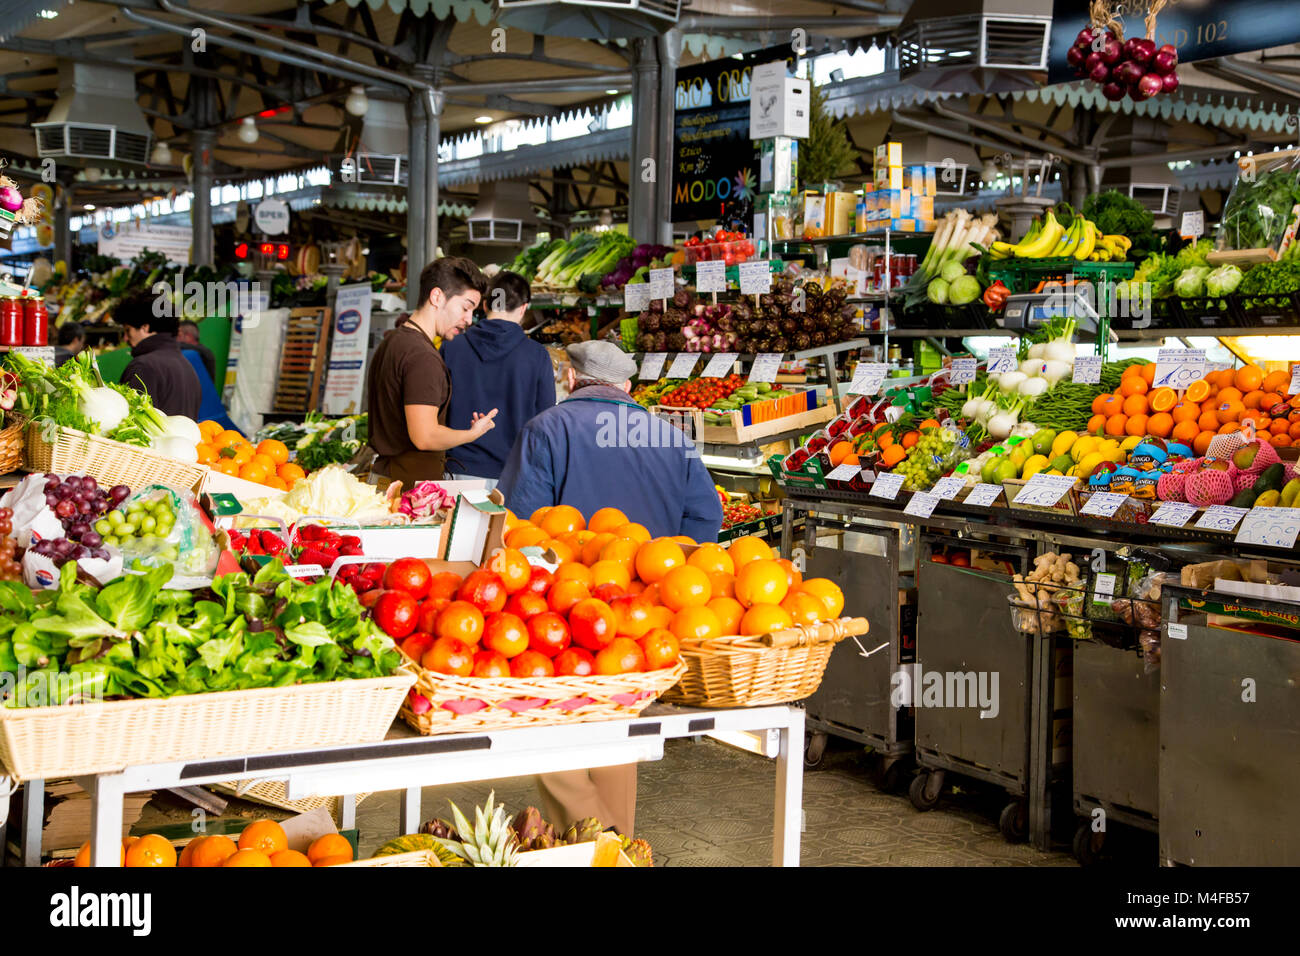 Fruit and vegetables in Mercato Albinelli in Modena Italy Stock Photo